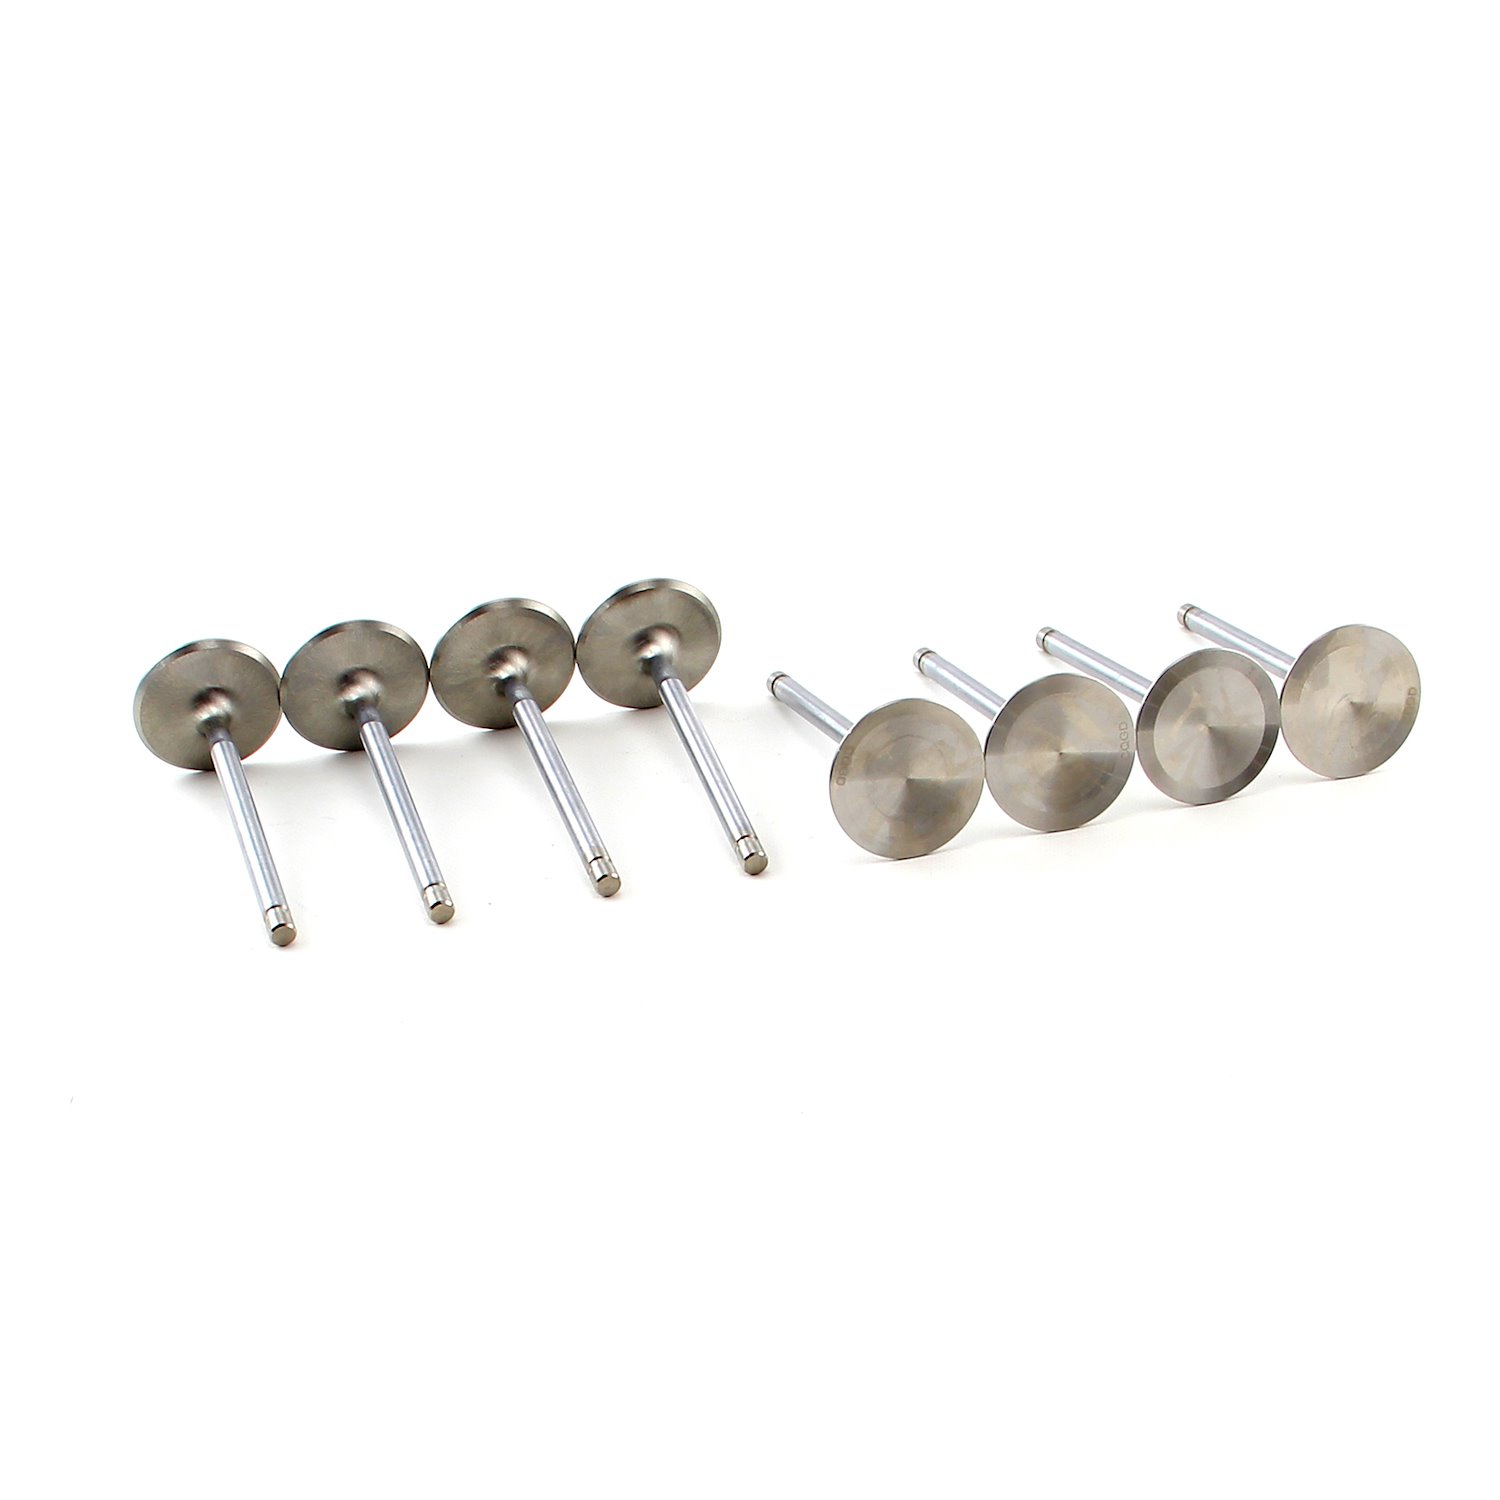 CHEVY LS7 2.200 5.250 8MM STAINLESS STEEL INTAKE VALVES SET 8PCS